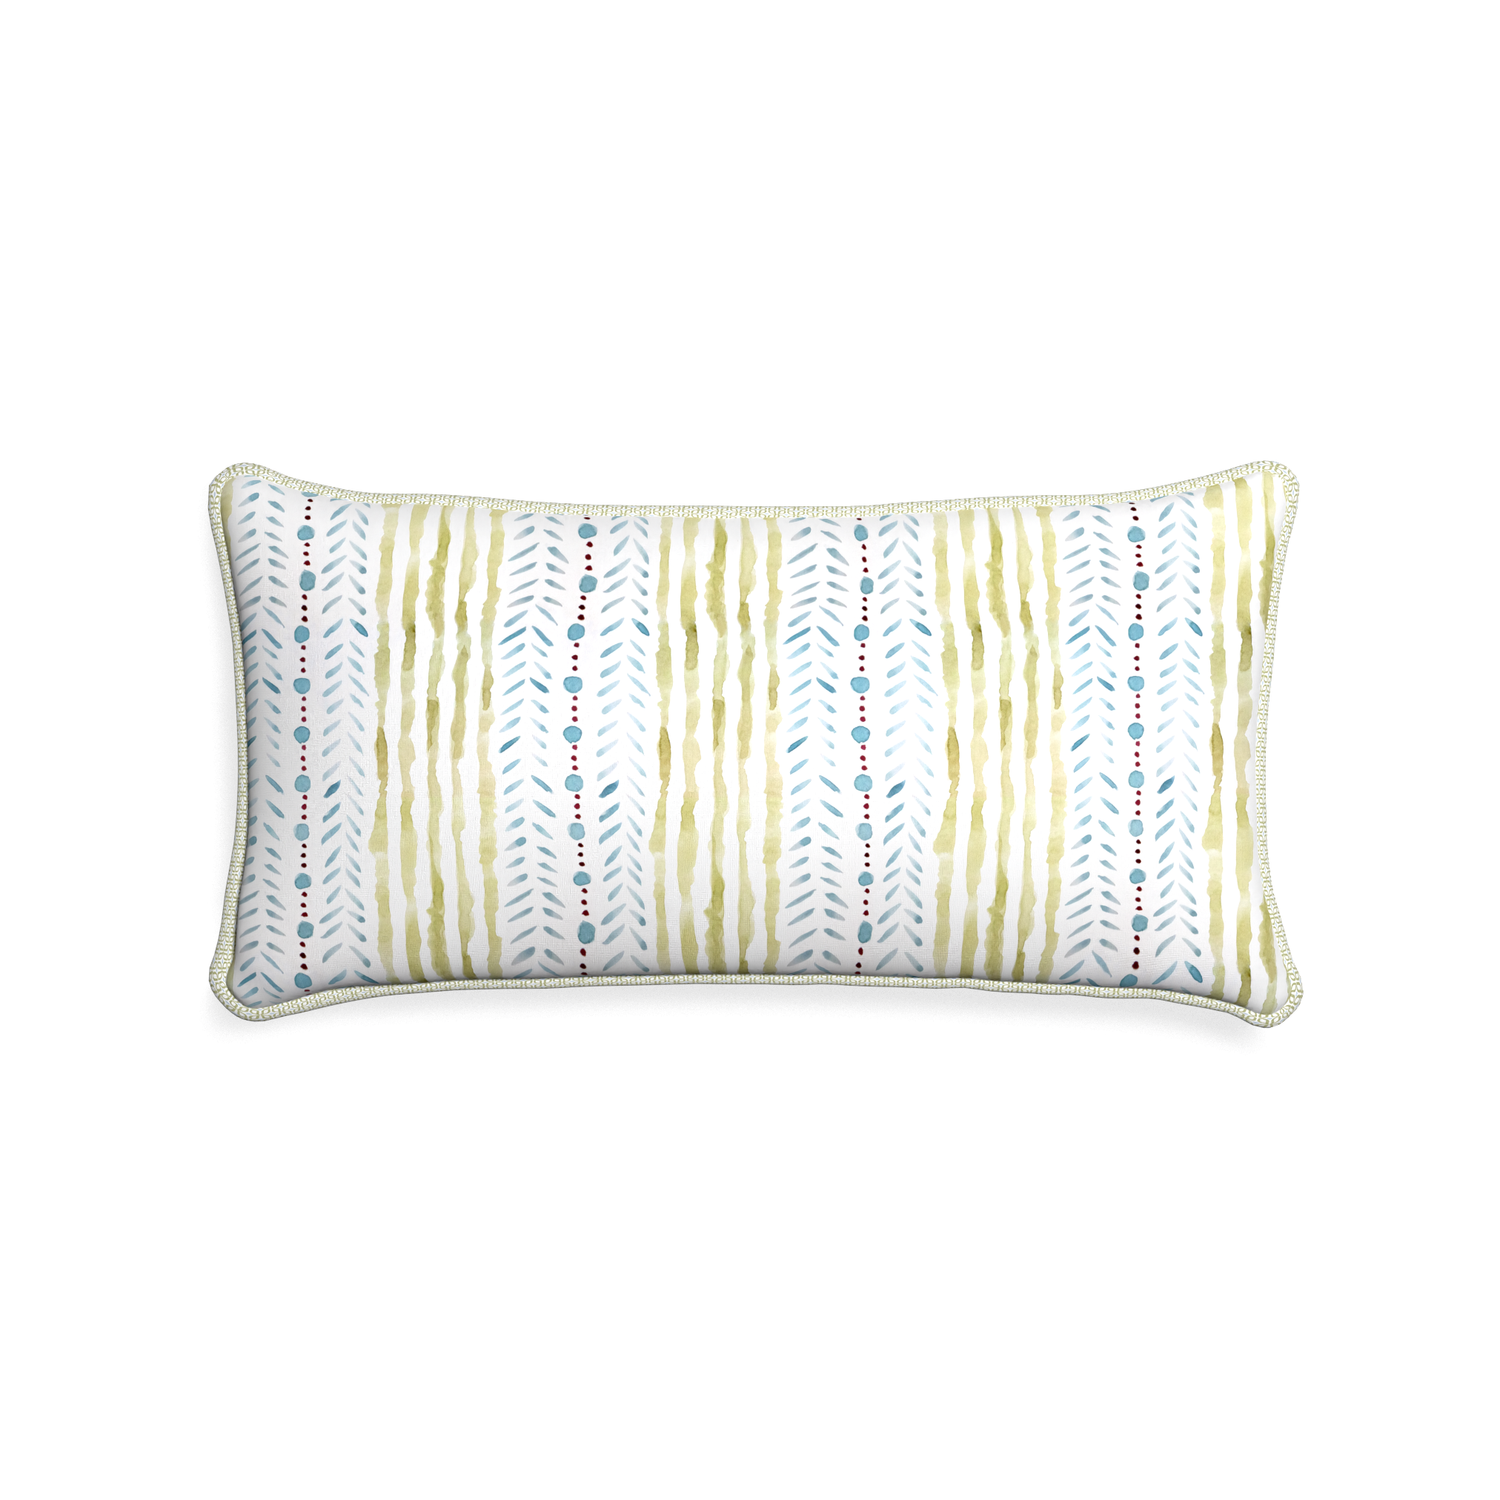 Midi-lumbar julia custom blue & green stripedpillow with l piping on white background